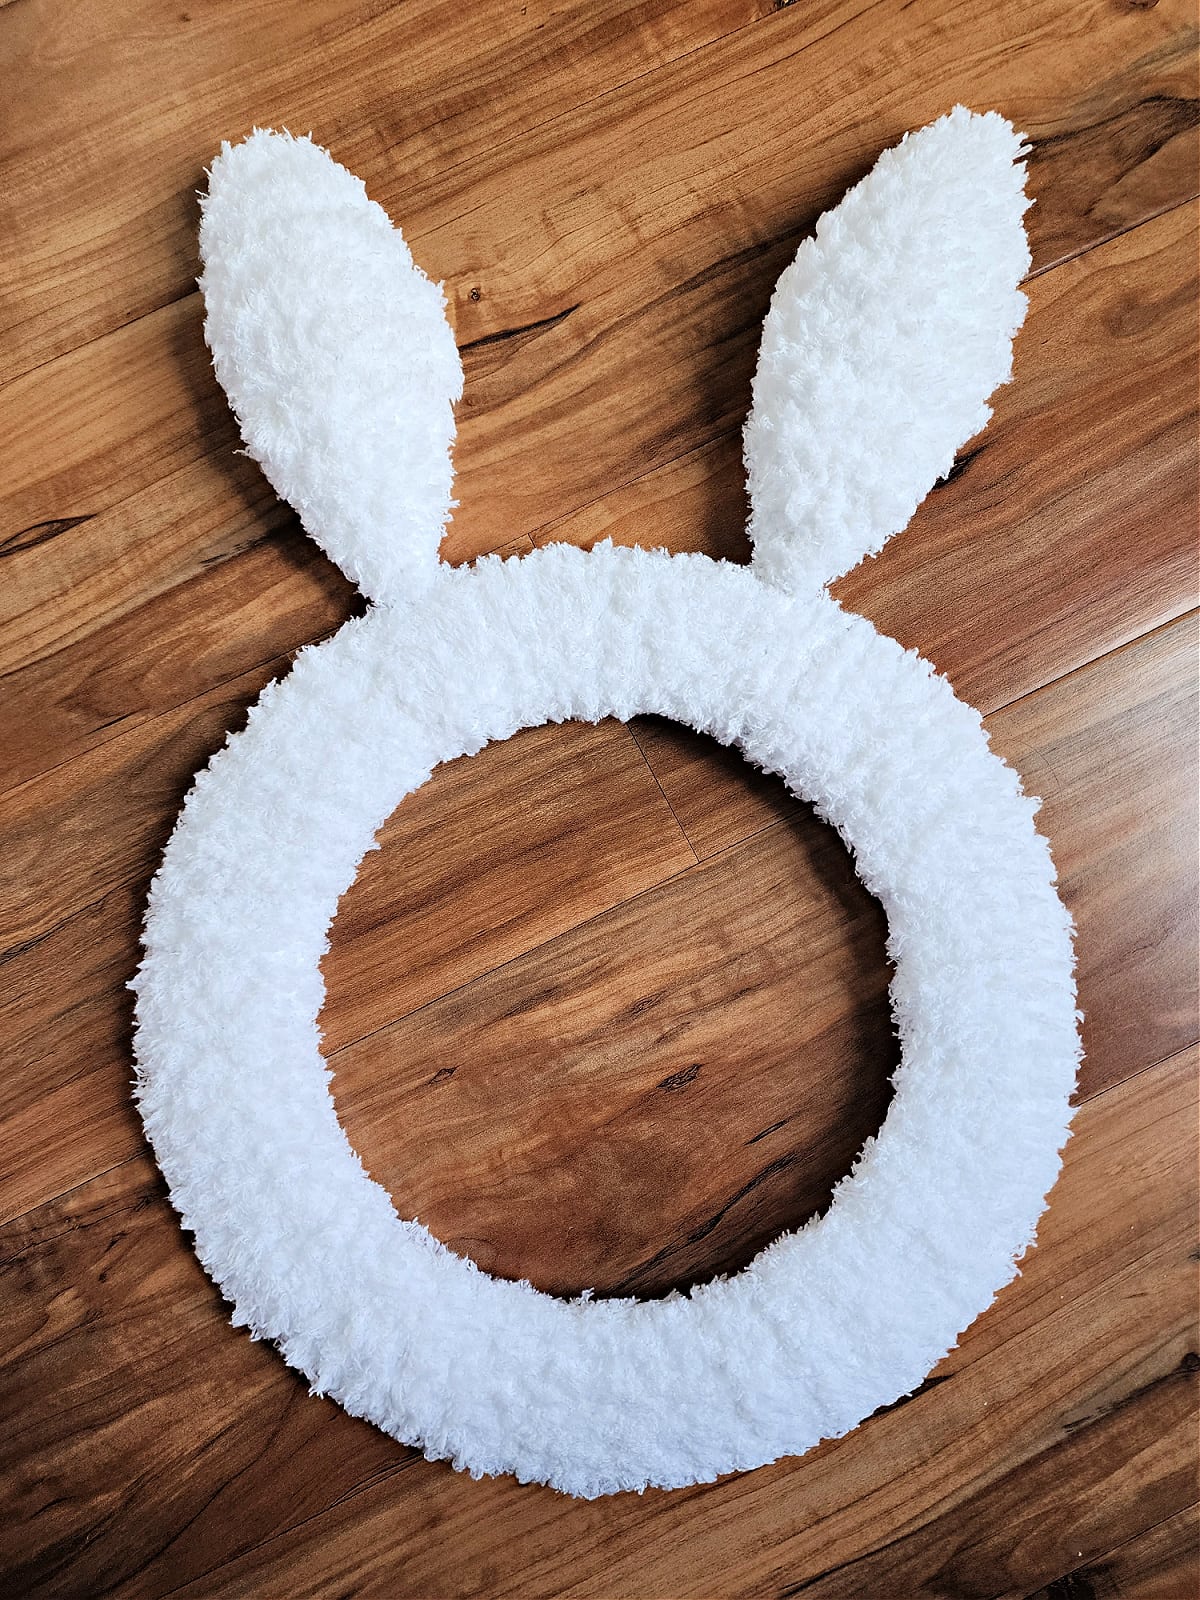 Bunny wreath with coat hanger ears covered in yarn ready to embellish.